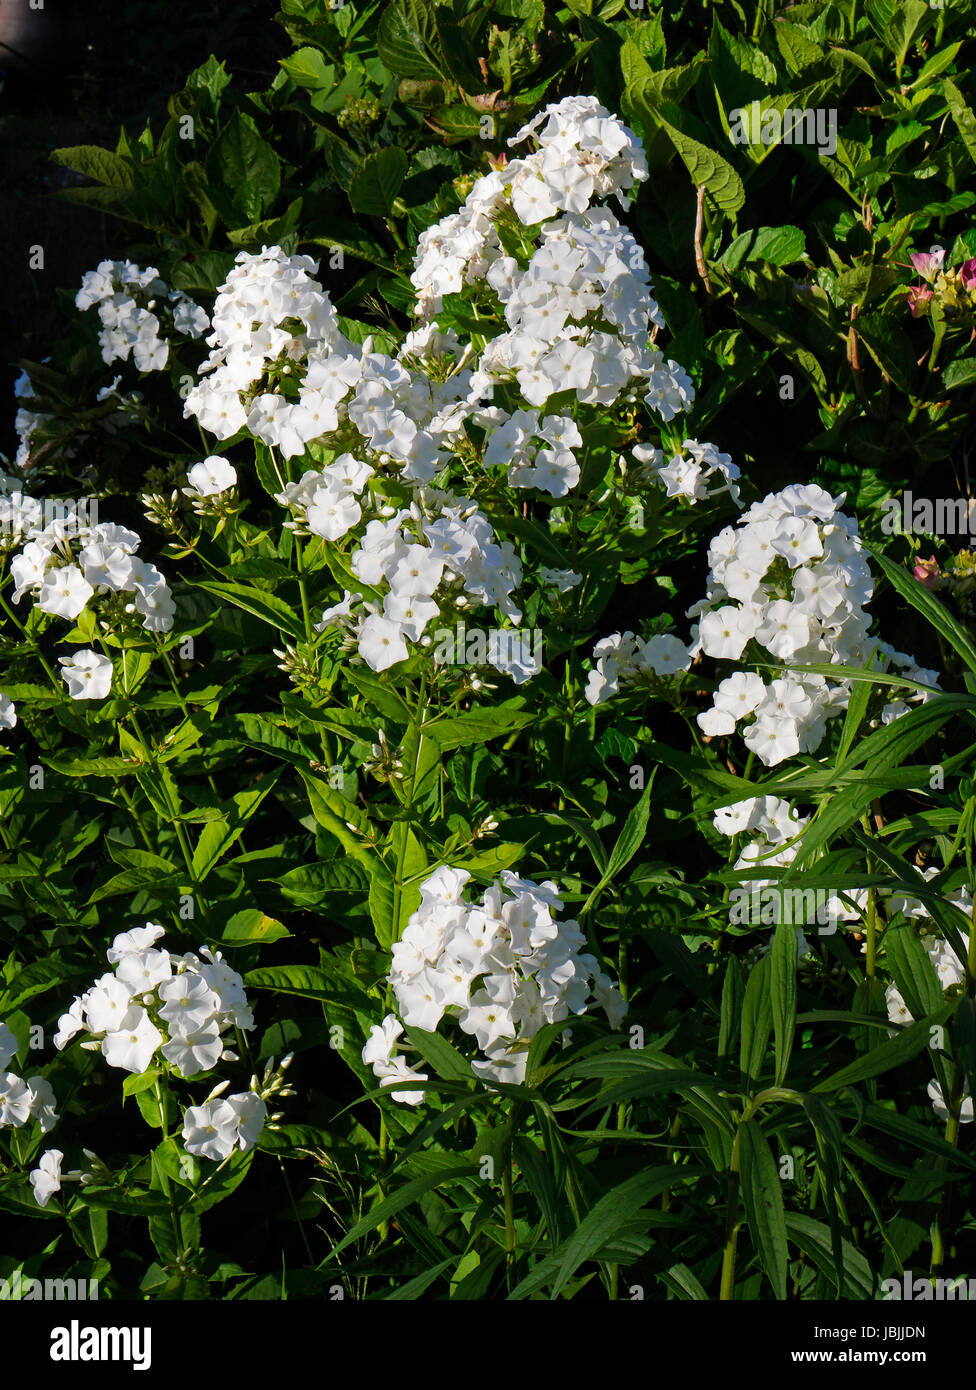 Phlox in bloom, phlox paniculata 'White Admiral' (Suzanne's vegetable garden, Le Pas, Mayenne, France). Stock Photo